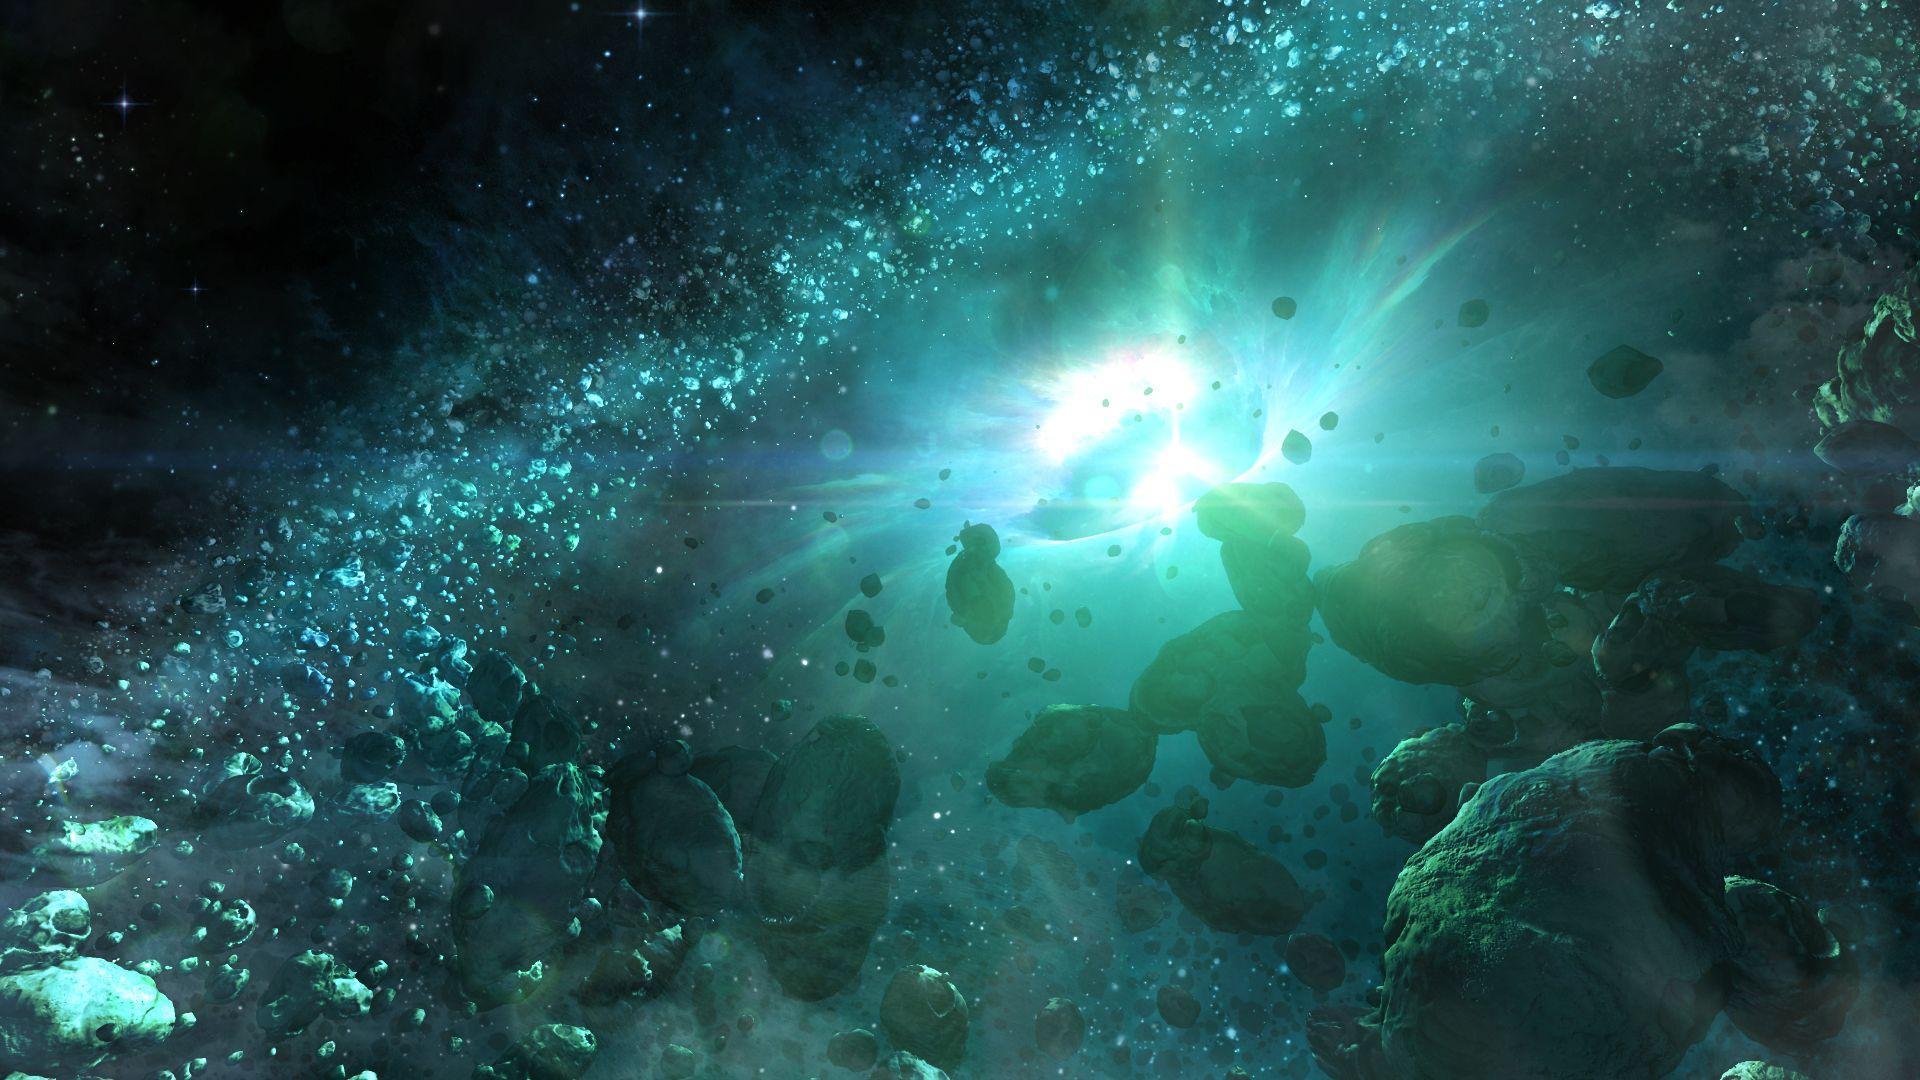 Full HD Wallpaper + Space, by Katherl Hannes, Rocks, Wormholes, Teal